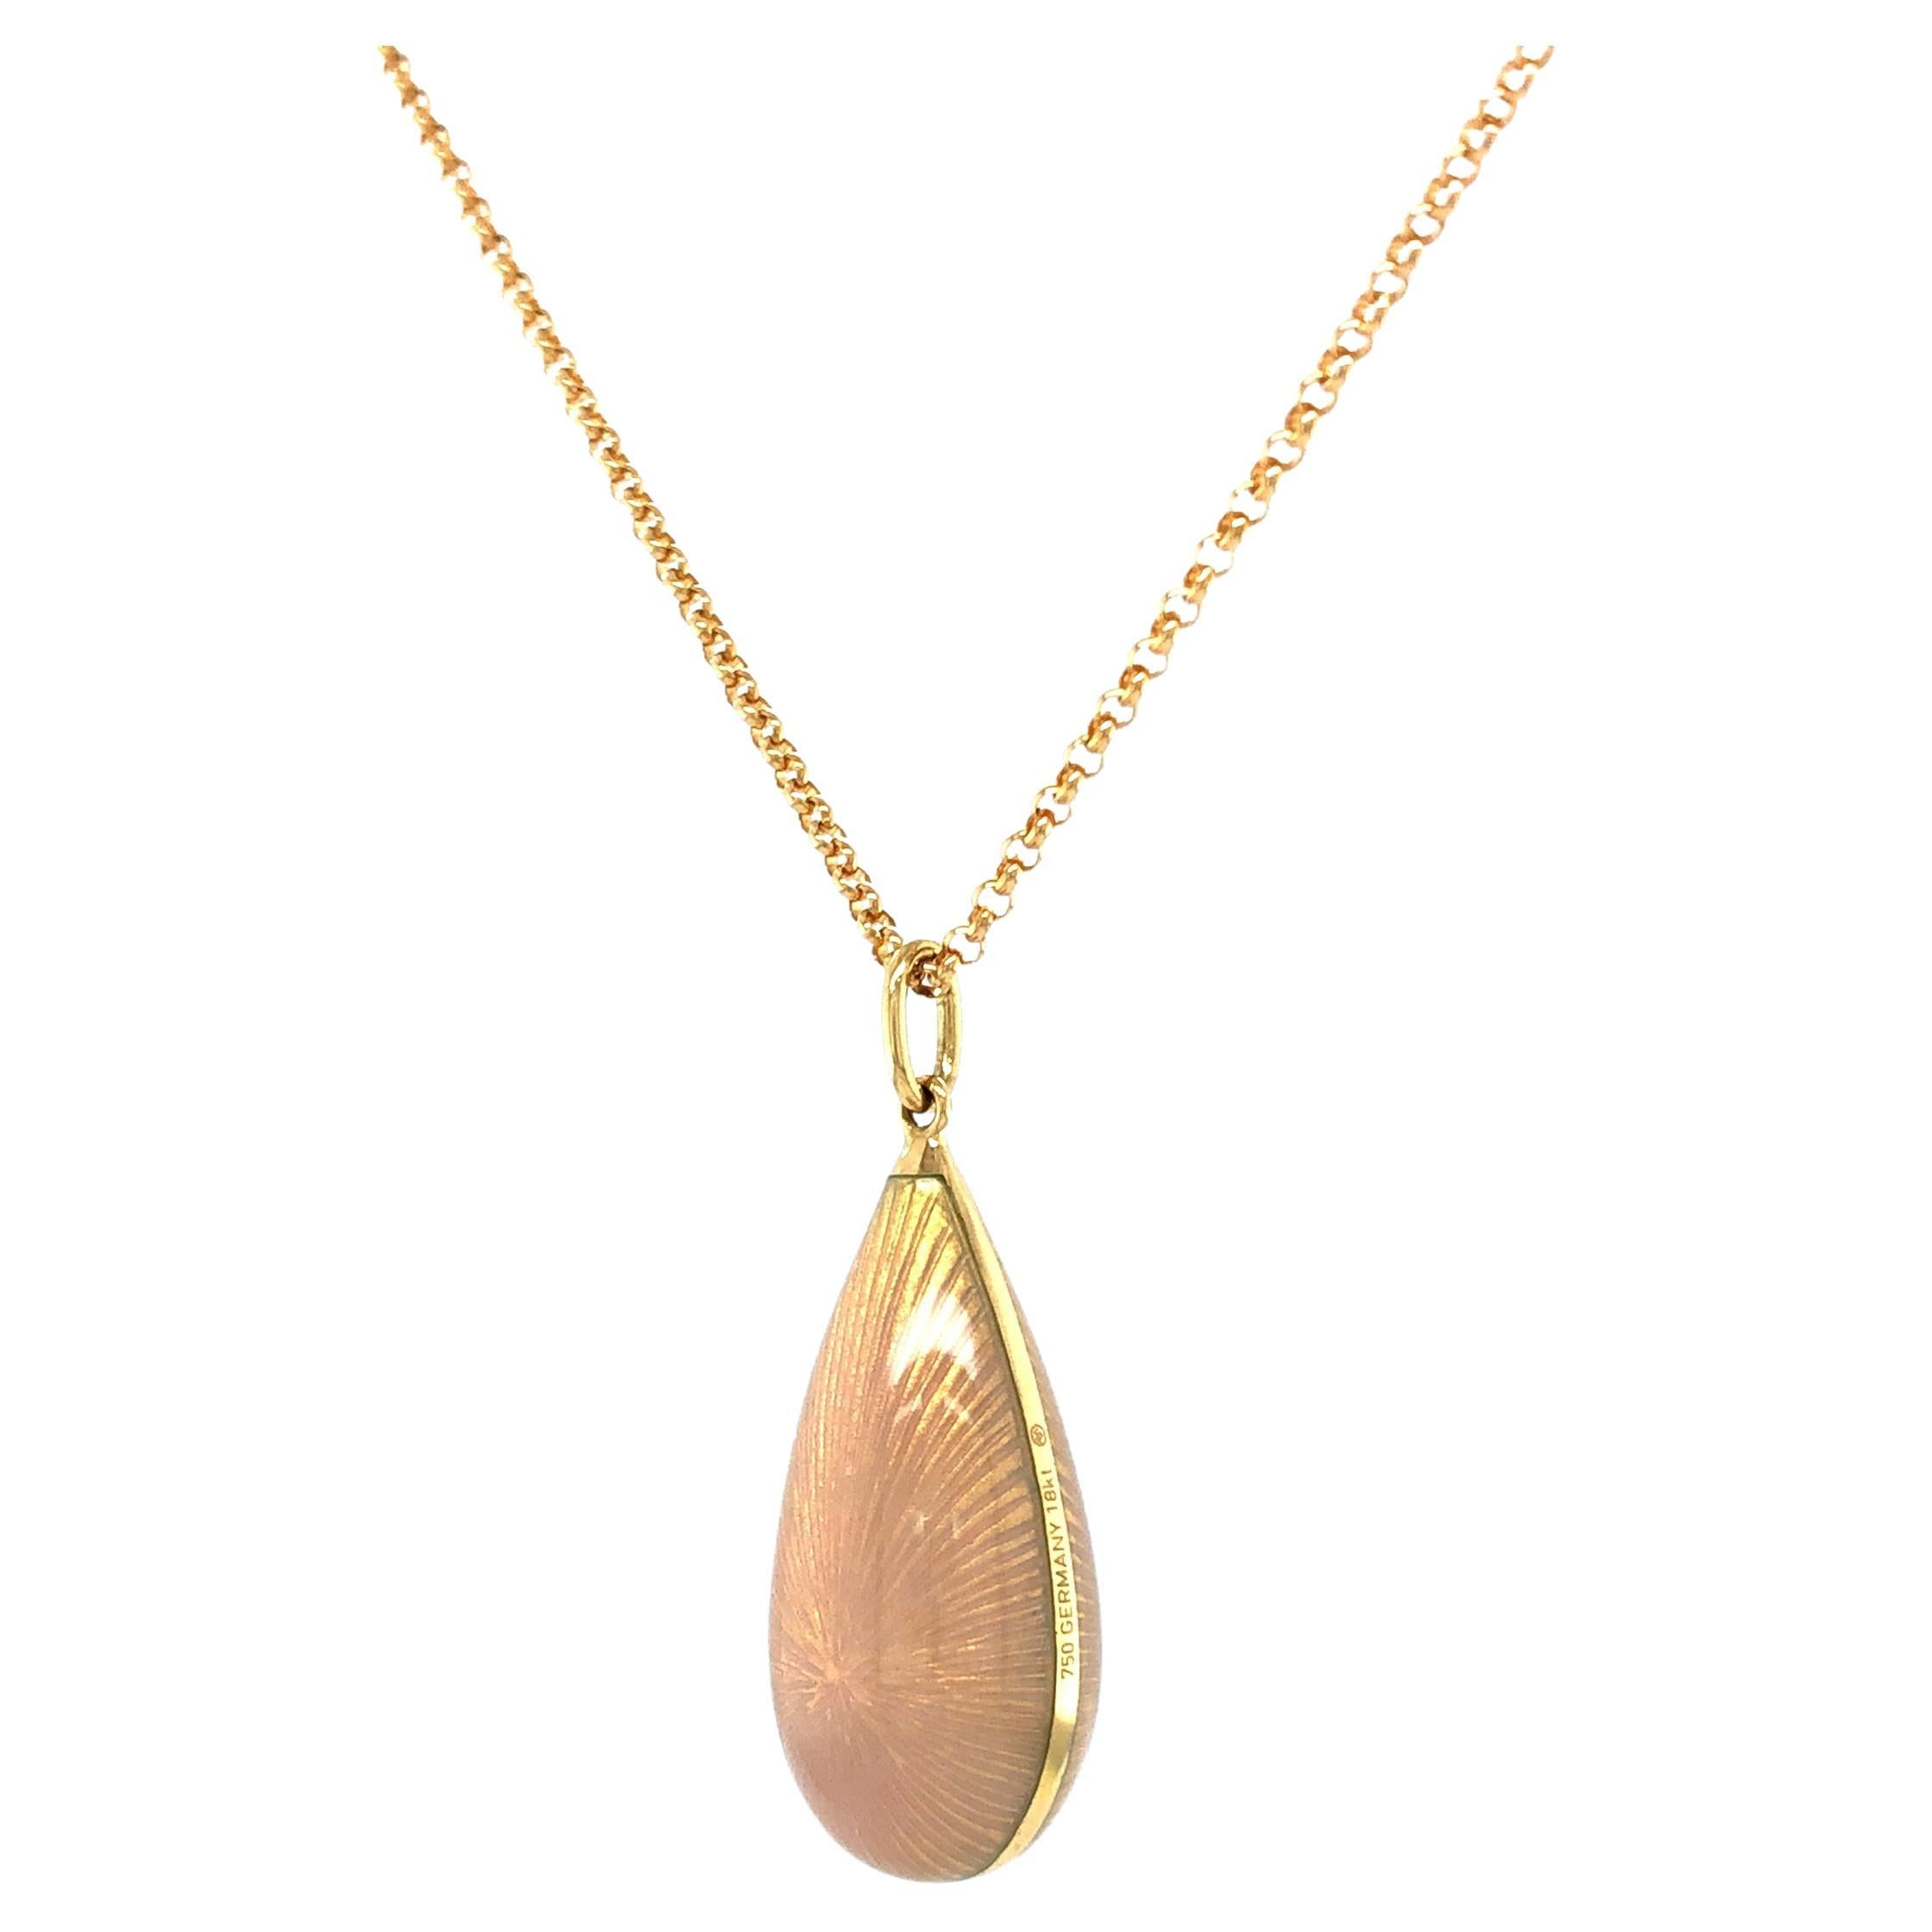 Victor Mayer drop pendant necklace 18k yellow gold, Dew Drop Collection, opalescent white vitreous enamel, guilloche, measurements app. 28.0 mm x 10.0 mm

About the creator Victor Mayer
Victor Mayer is internationally renowned for elegant timeless